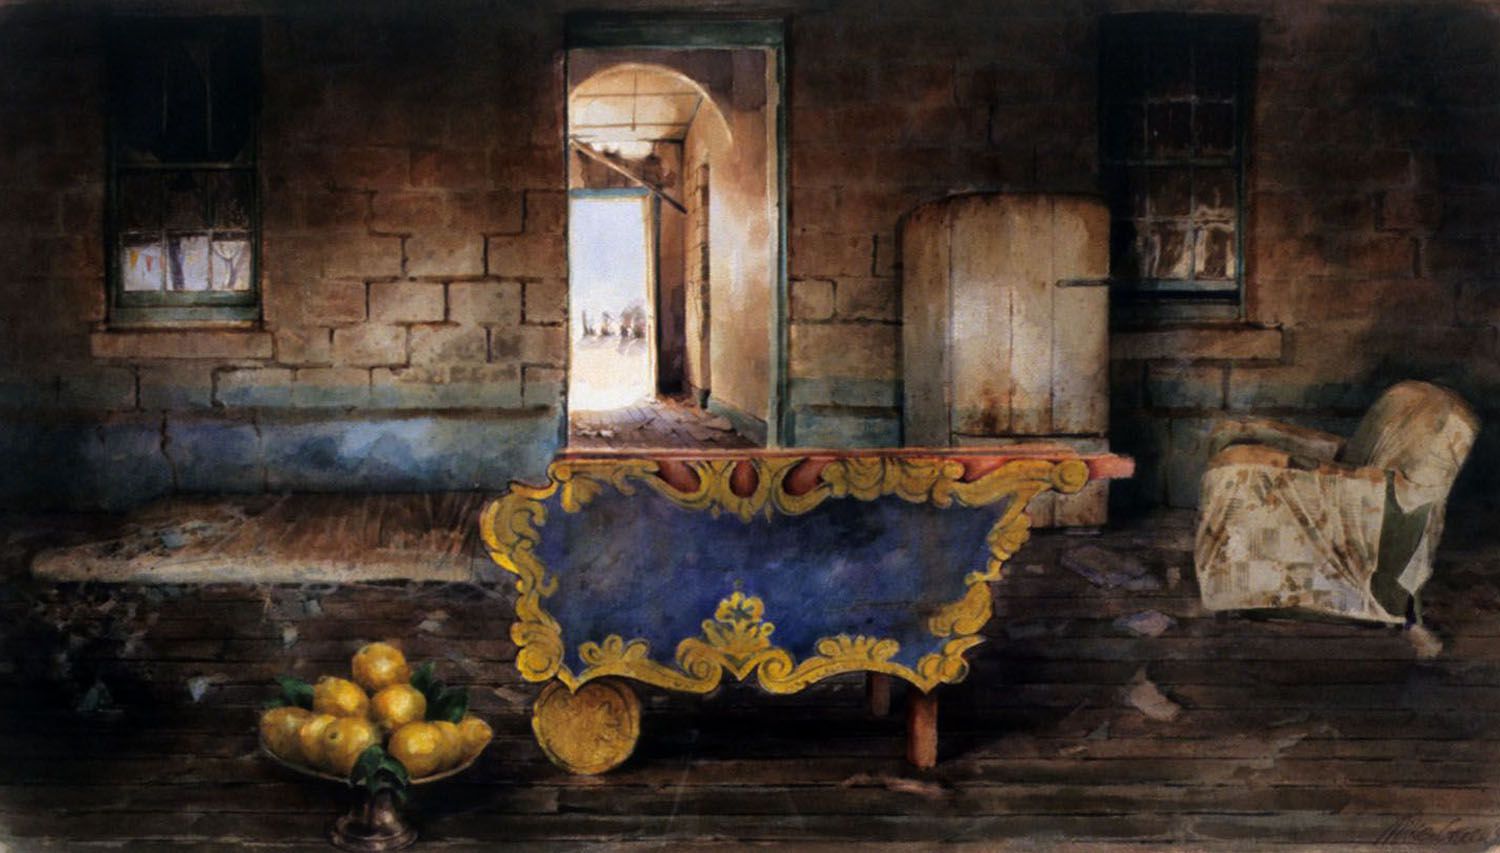 "The Palace stage" 1993. 62 x 112cm